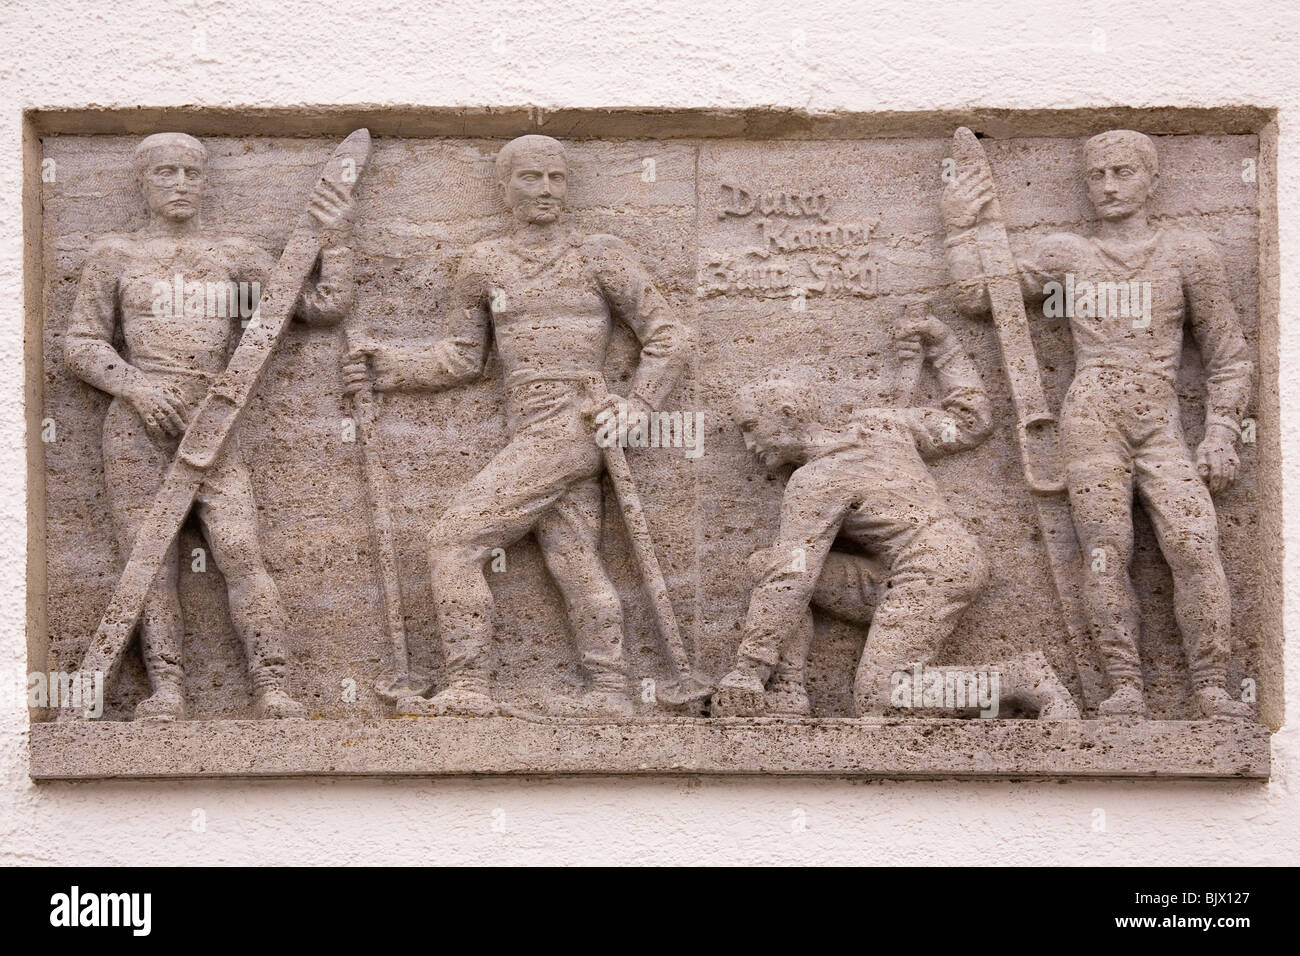 A bas-relief scene showing skiers, on the Olympiahaus in Garmisch-Partenkirchen, Germany. Stock Photo